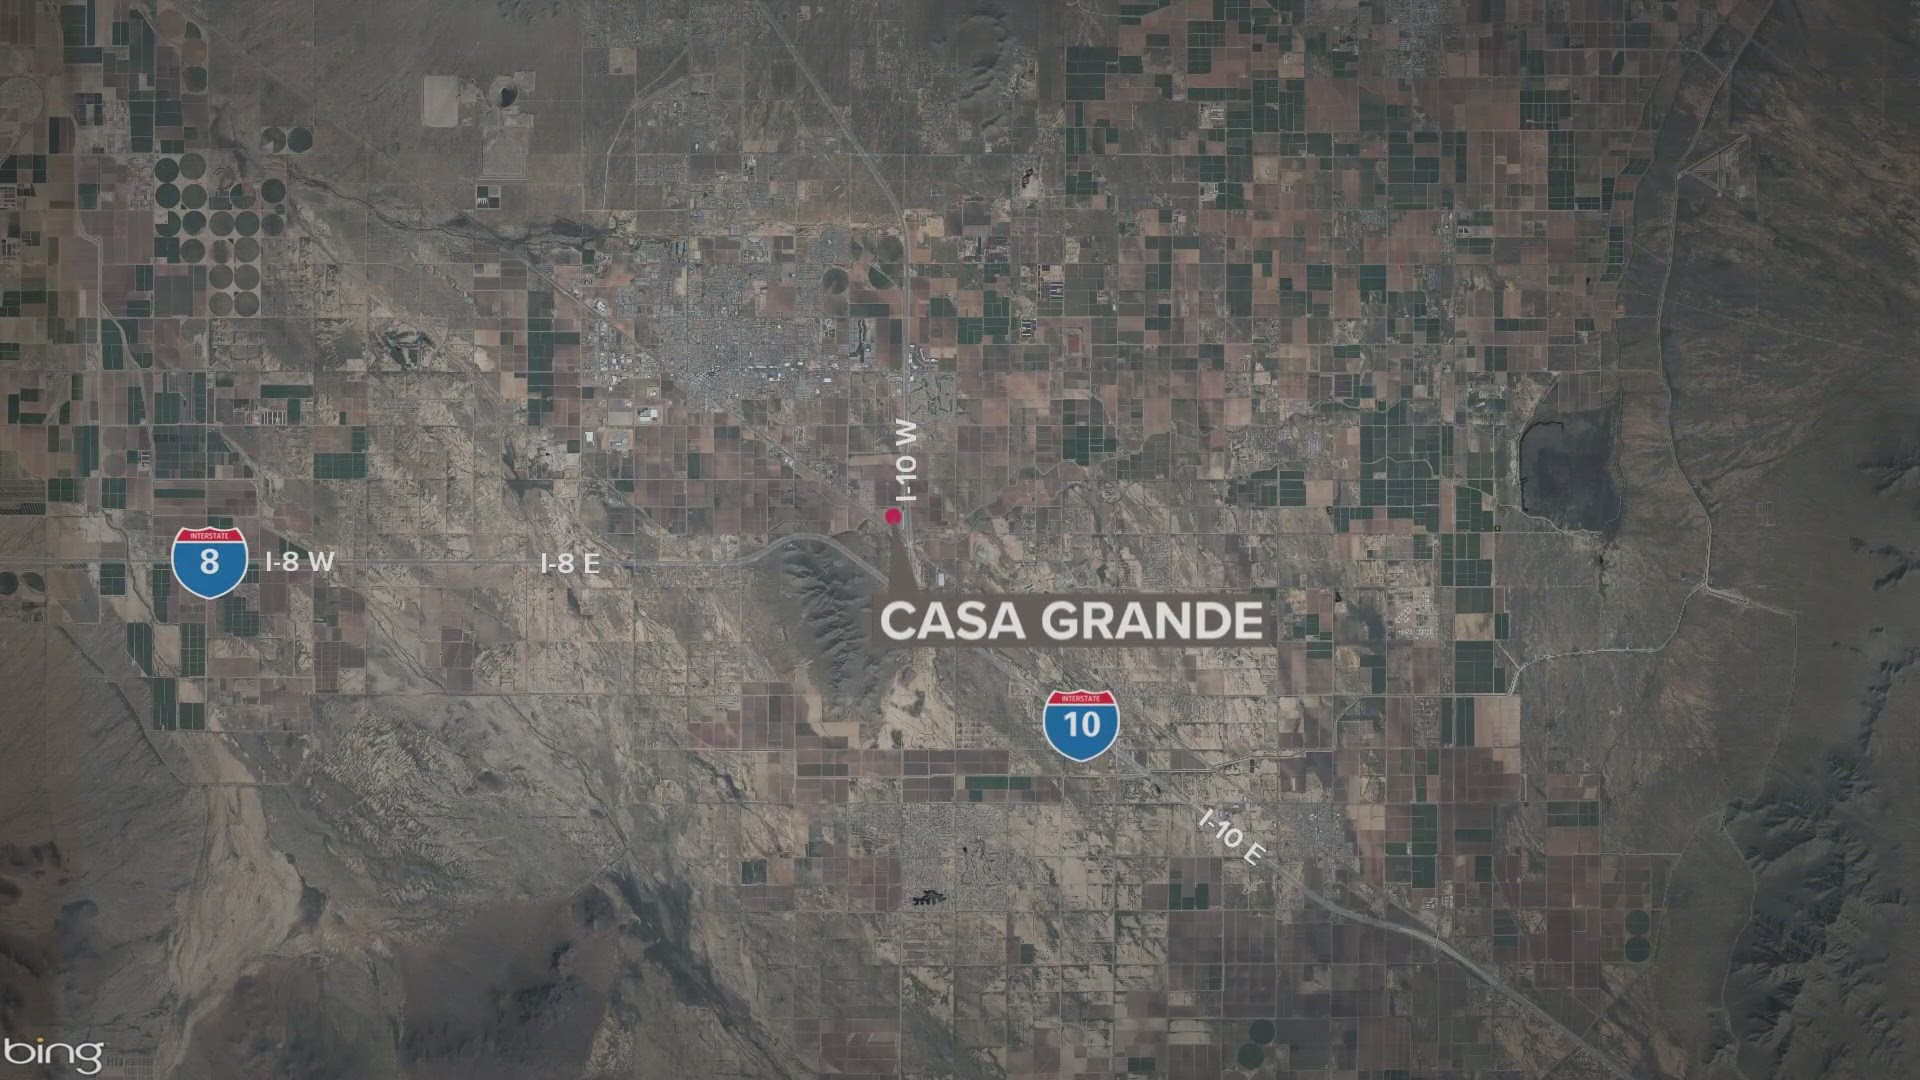 Police in Casa Grande have launched an investigation after a man was found dead in the front yard of a home after being shot.